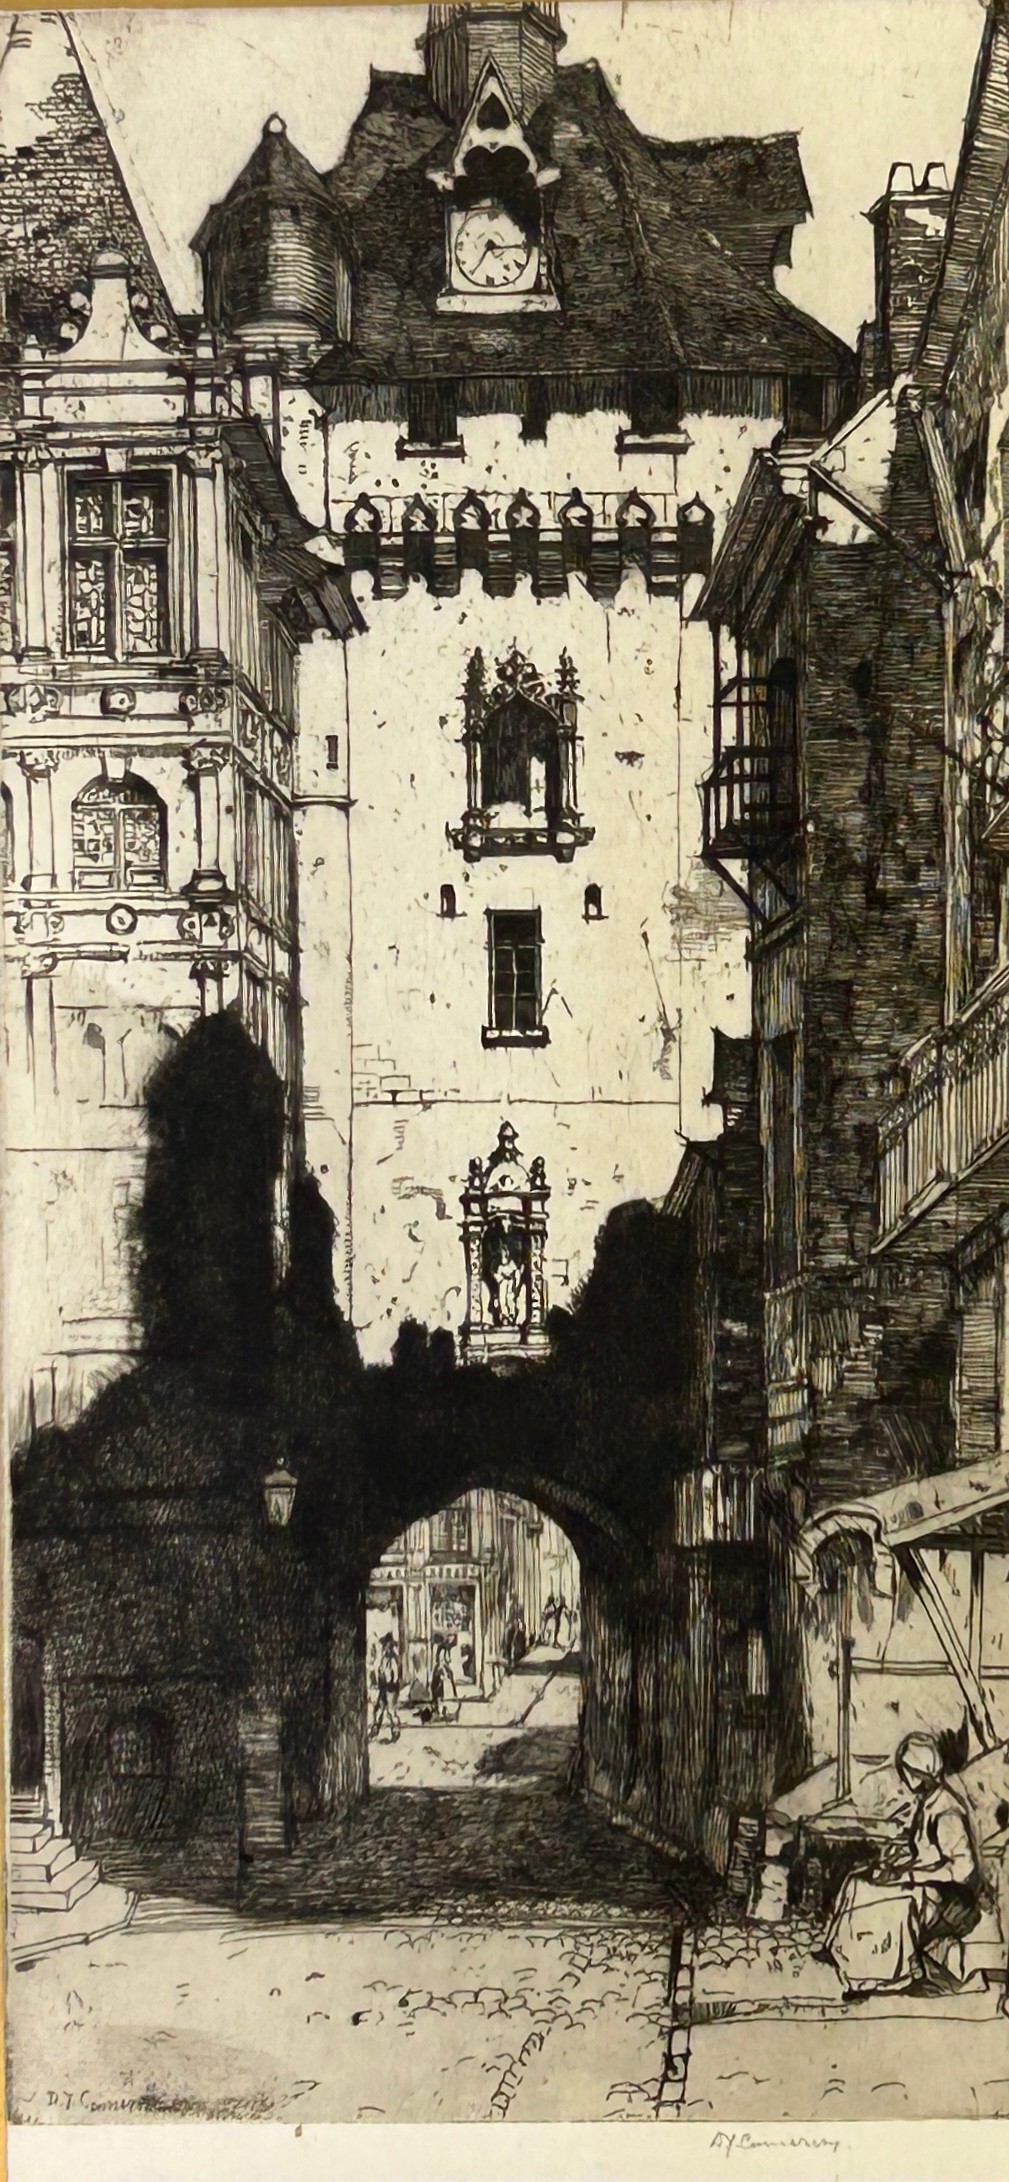 DAVID YOUNG CAMERON (1865-1945) Drypoint on paper ‘Clocktower Arch’, signed in pencil 25cm x 12.5cm